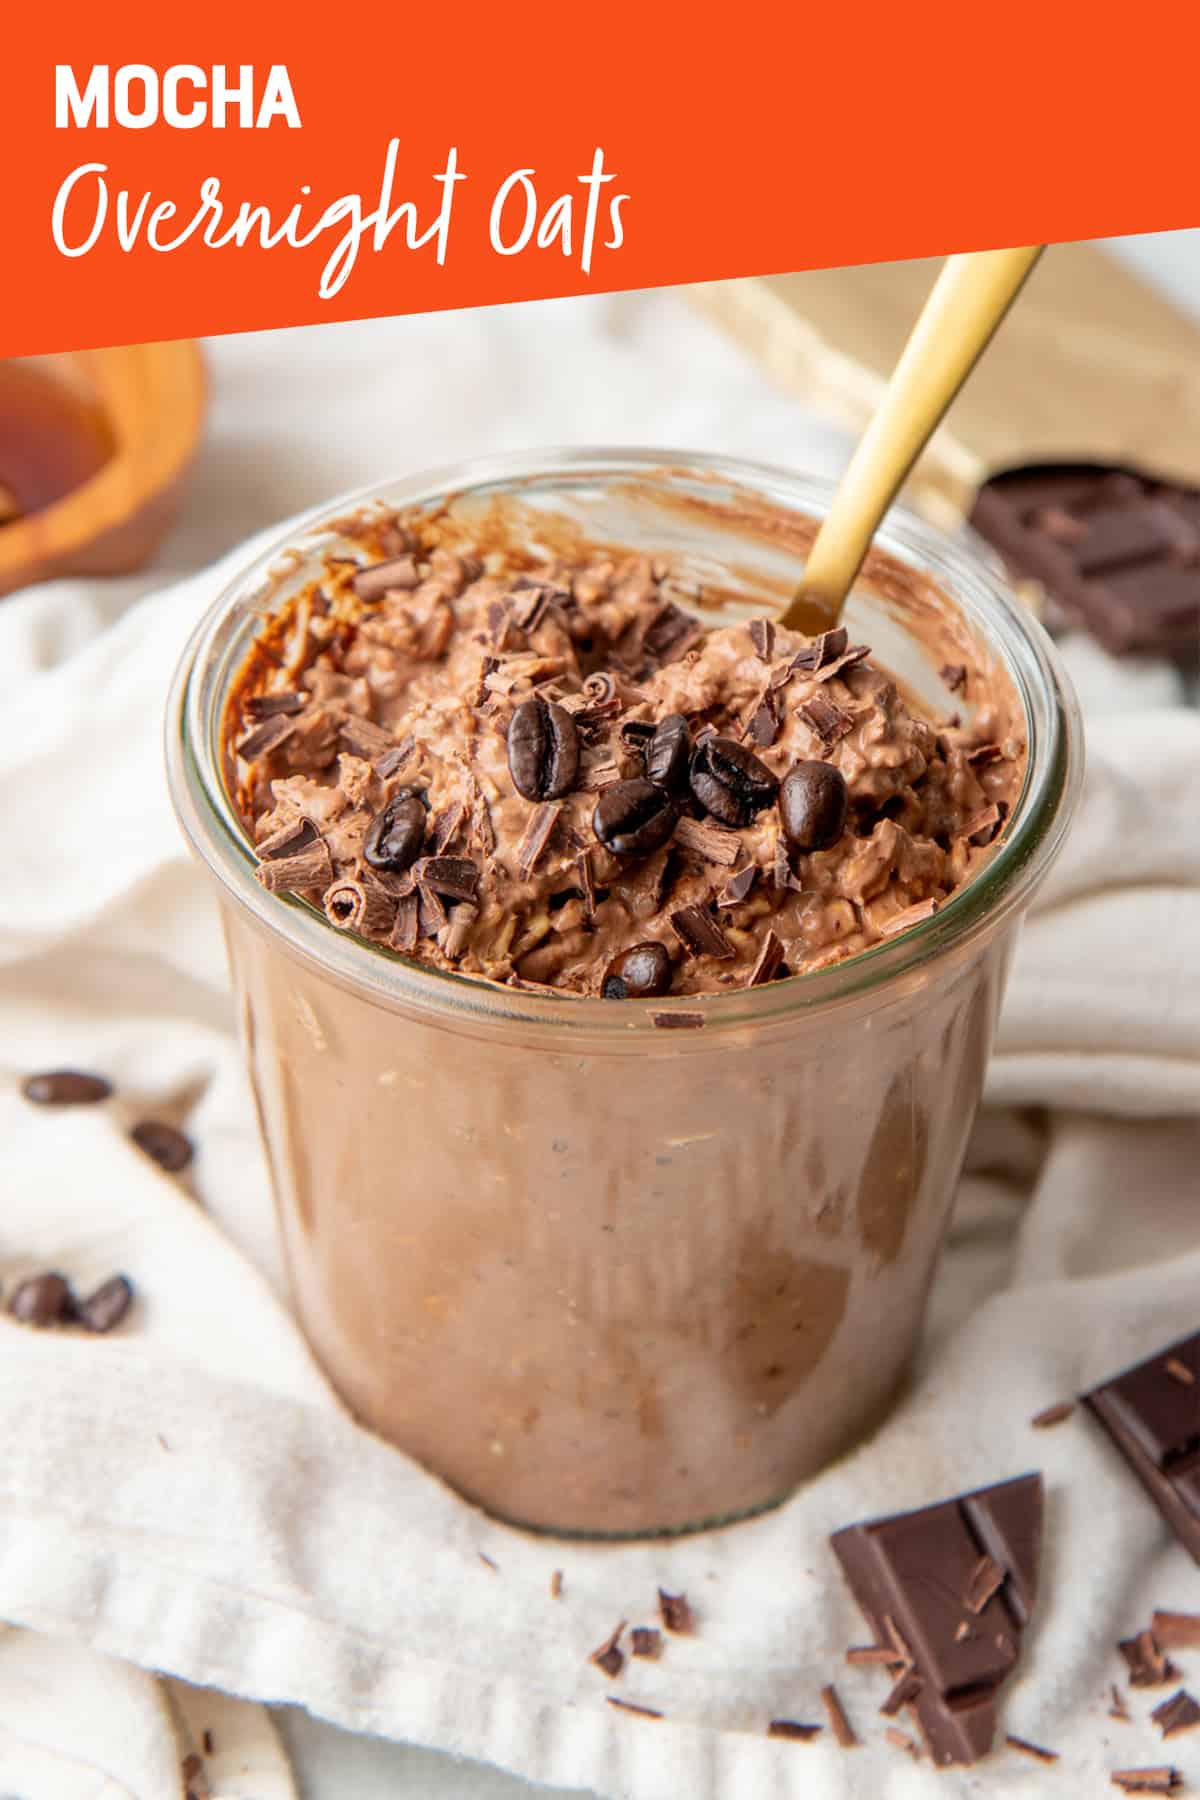 A gold spoon sits in a jar full of mocha overnight oats. A text overlay reads "Mocha Overnight Oats."